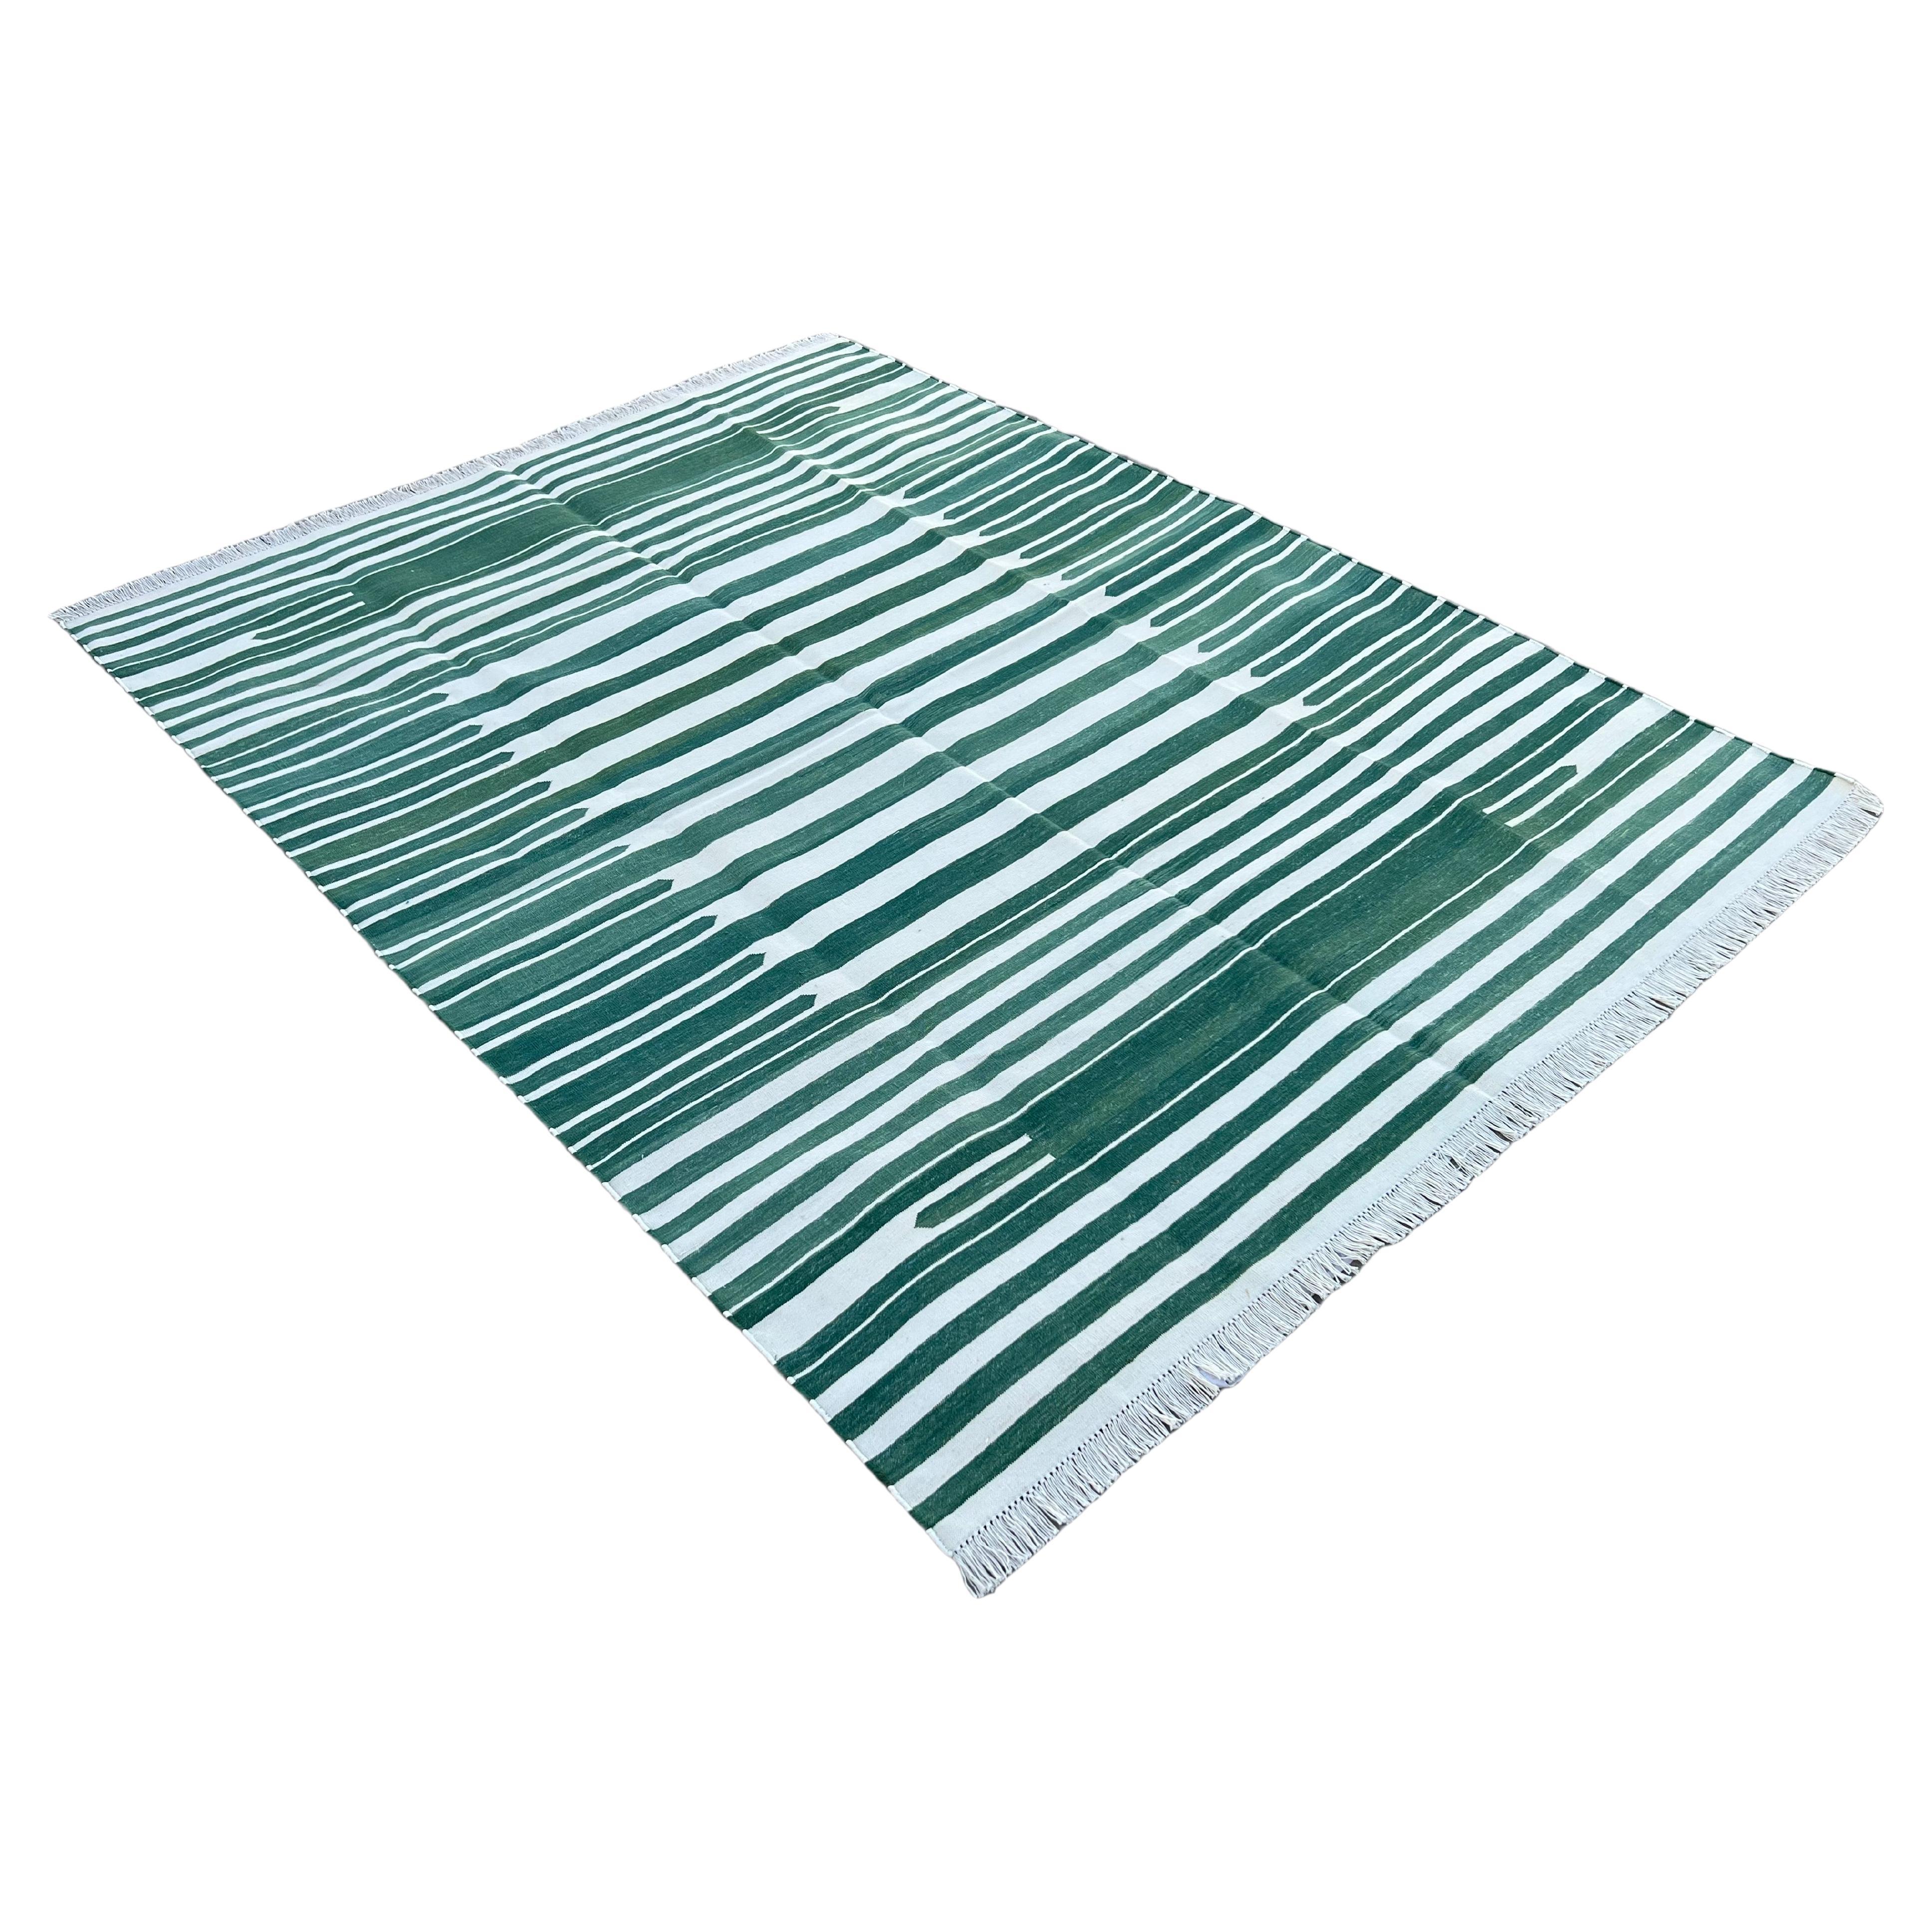 Handmade Cotton Area Flat Weave Rug, Green And White Striped Indian Dhurrie Rug For Sale